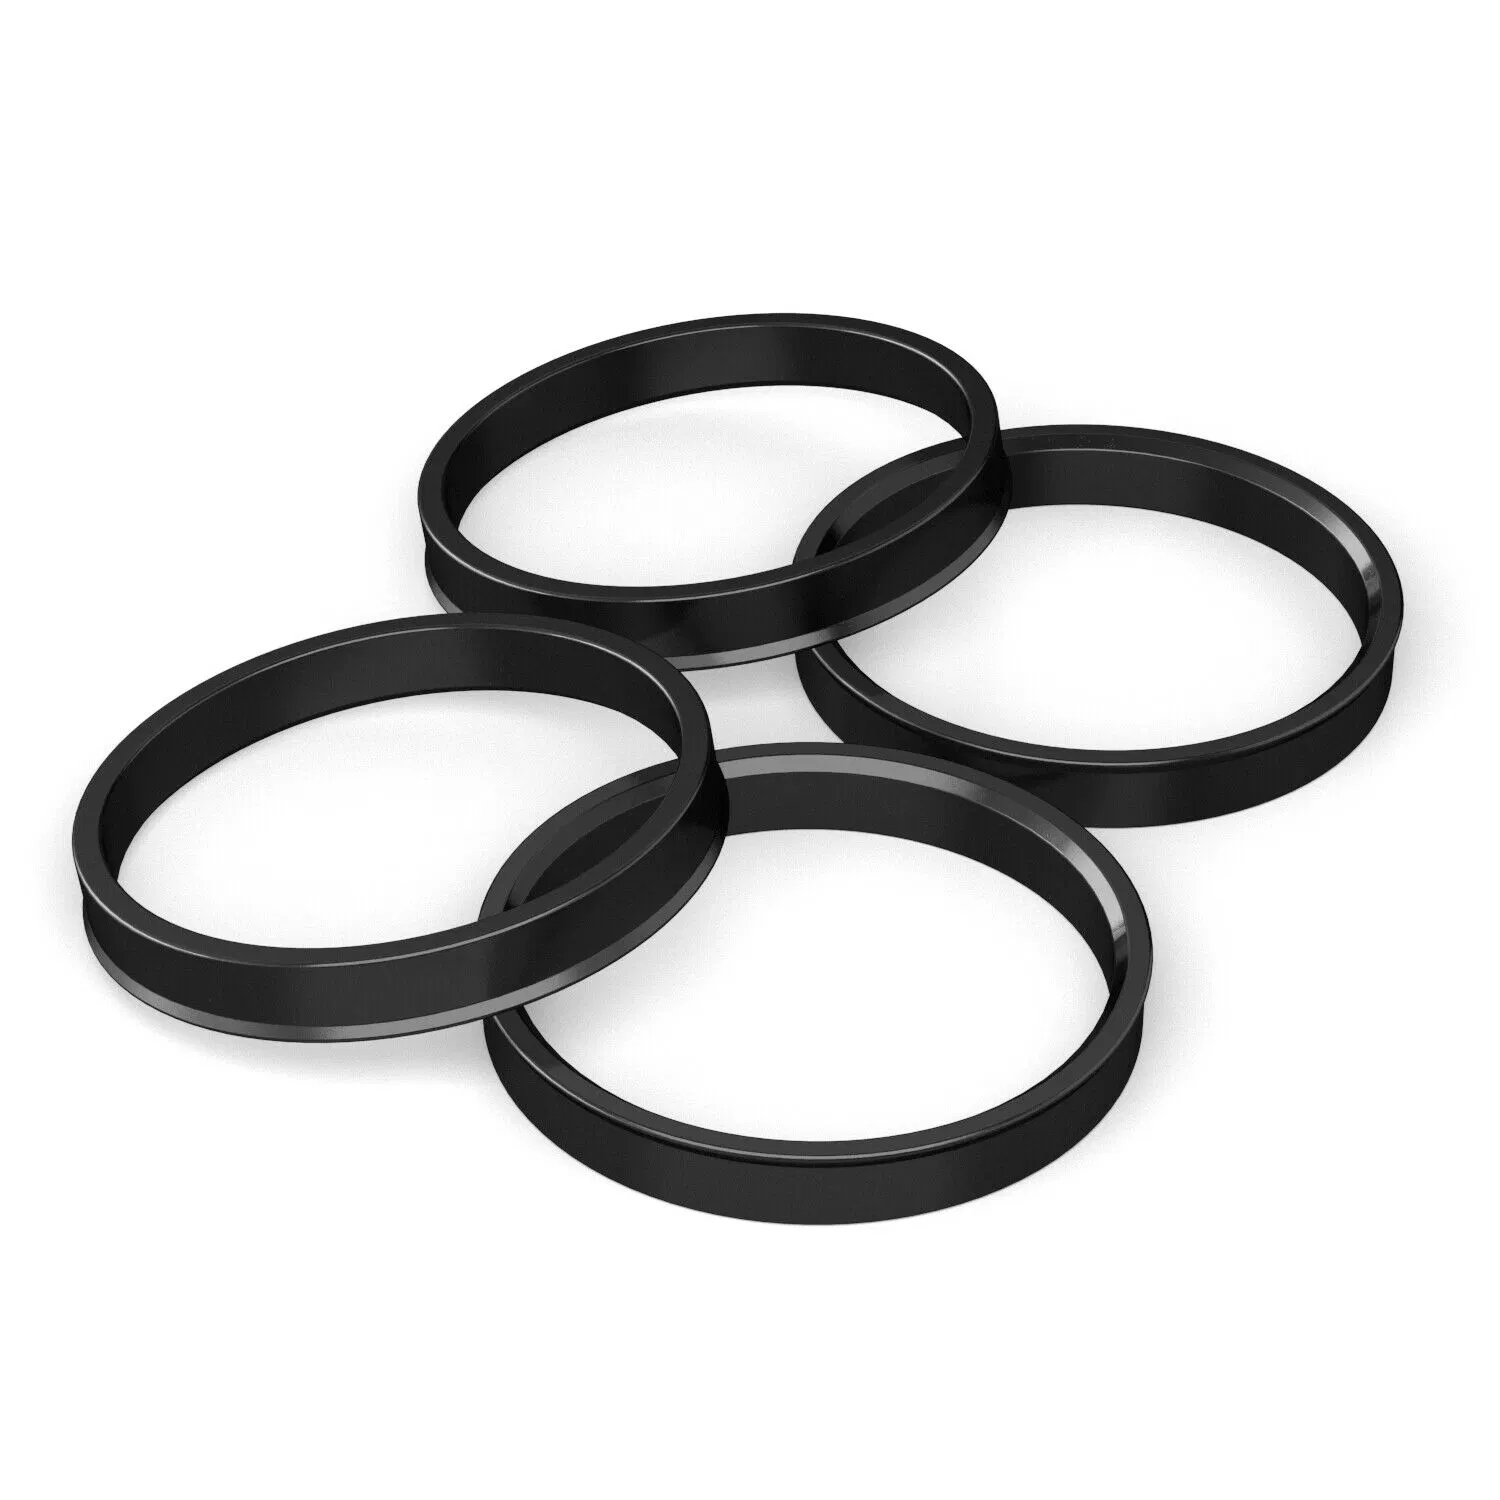 Plastic Hubcentric Rings 65.1mm Hub to 73.1mm Wheel